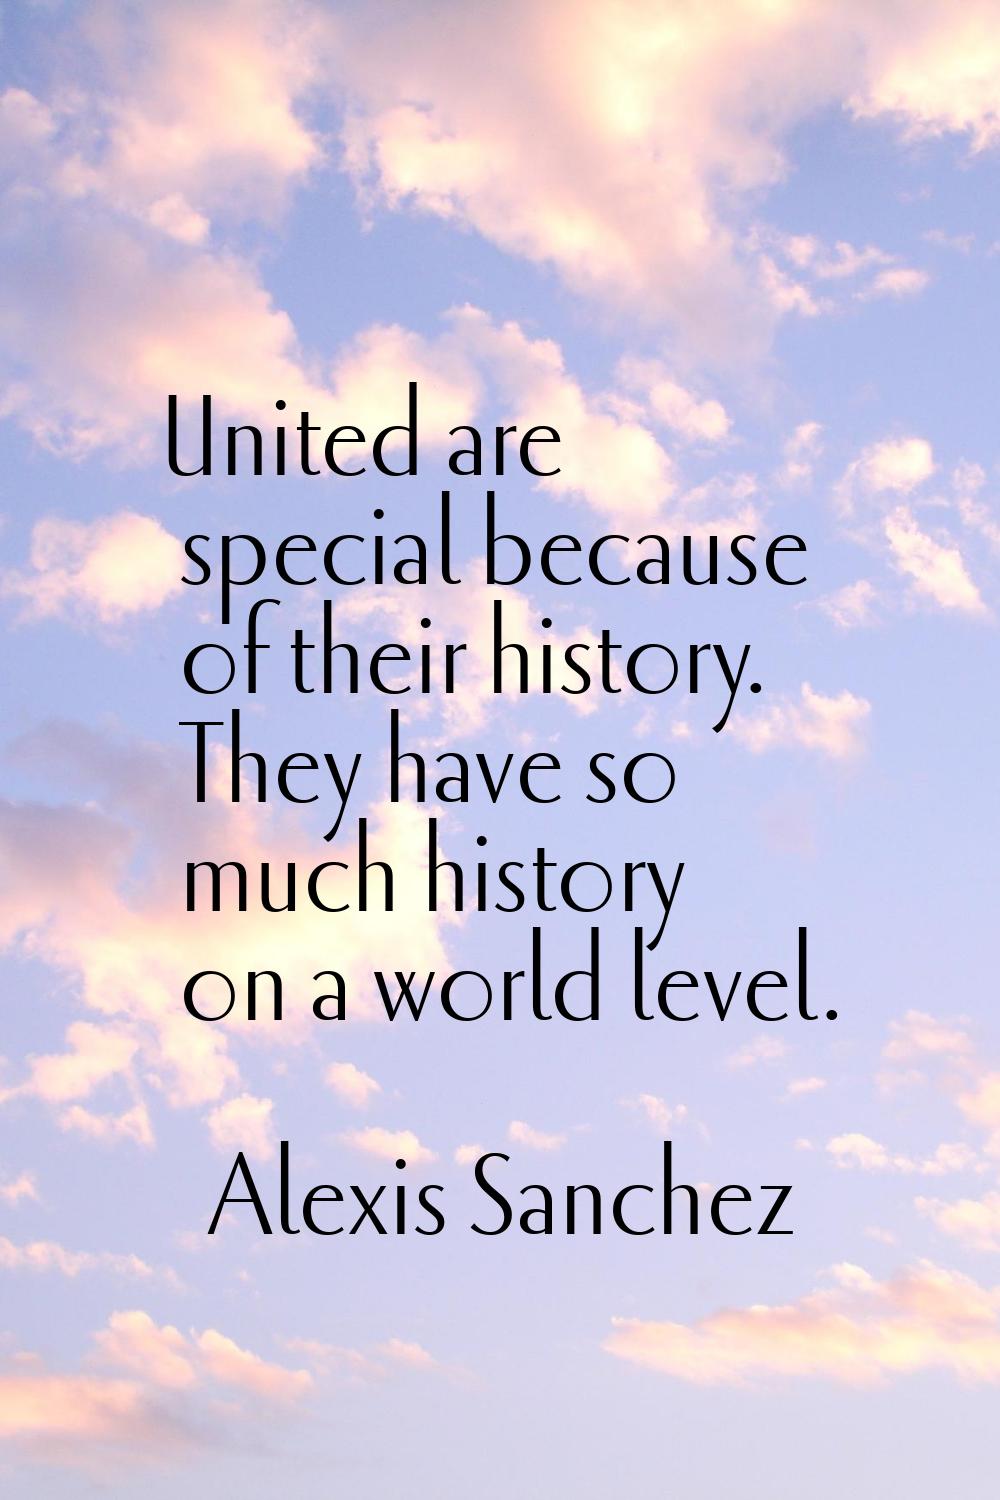 United are special because of their history. They have so much history on a world level.